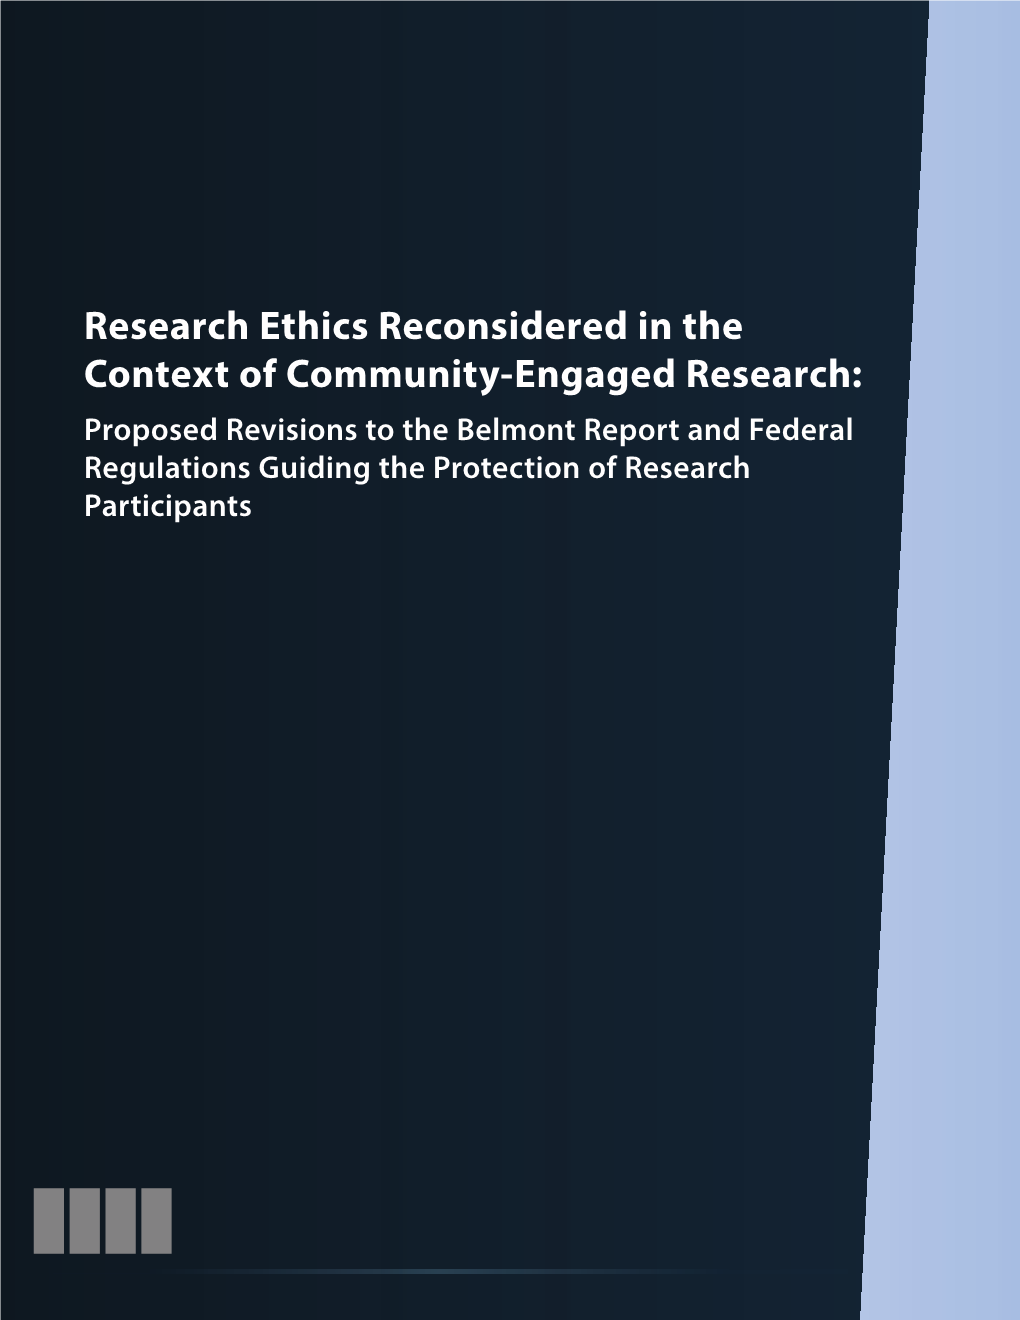 Research Ethics Reconsidered in the Context of Community-Engaged